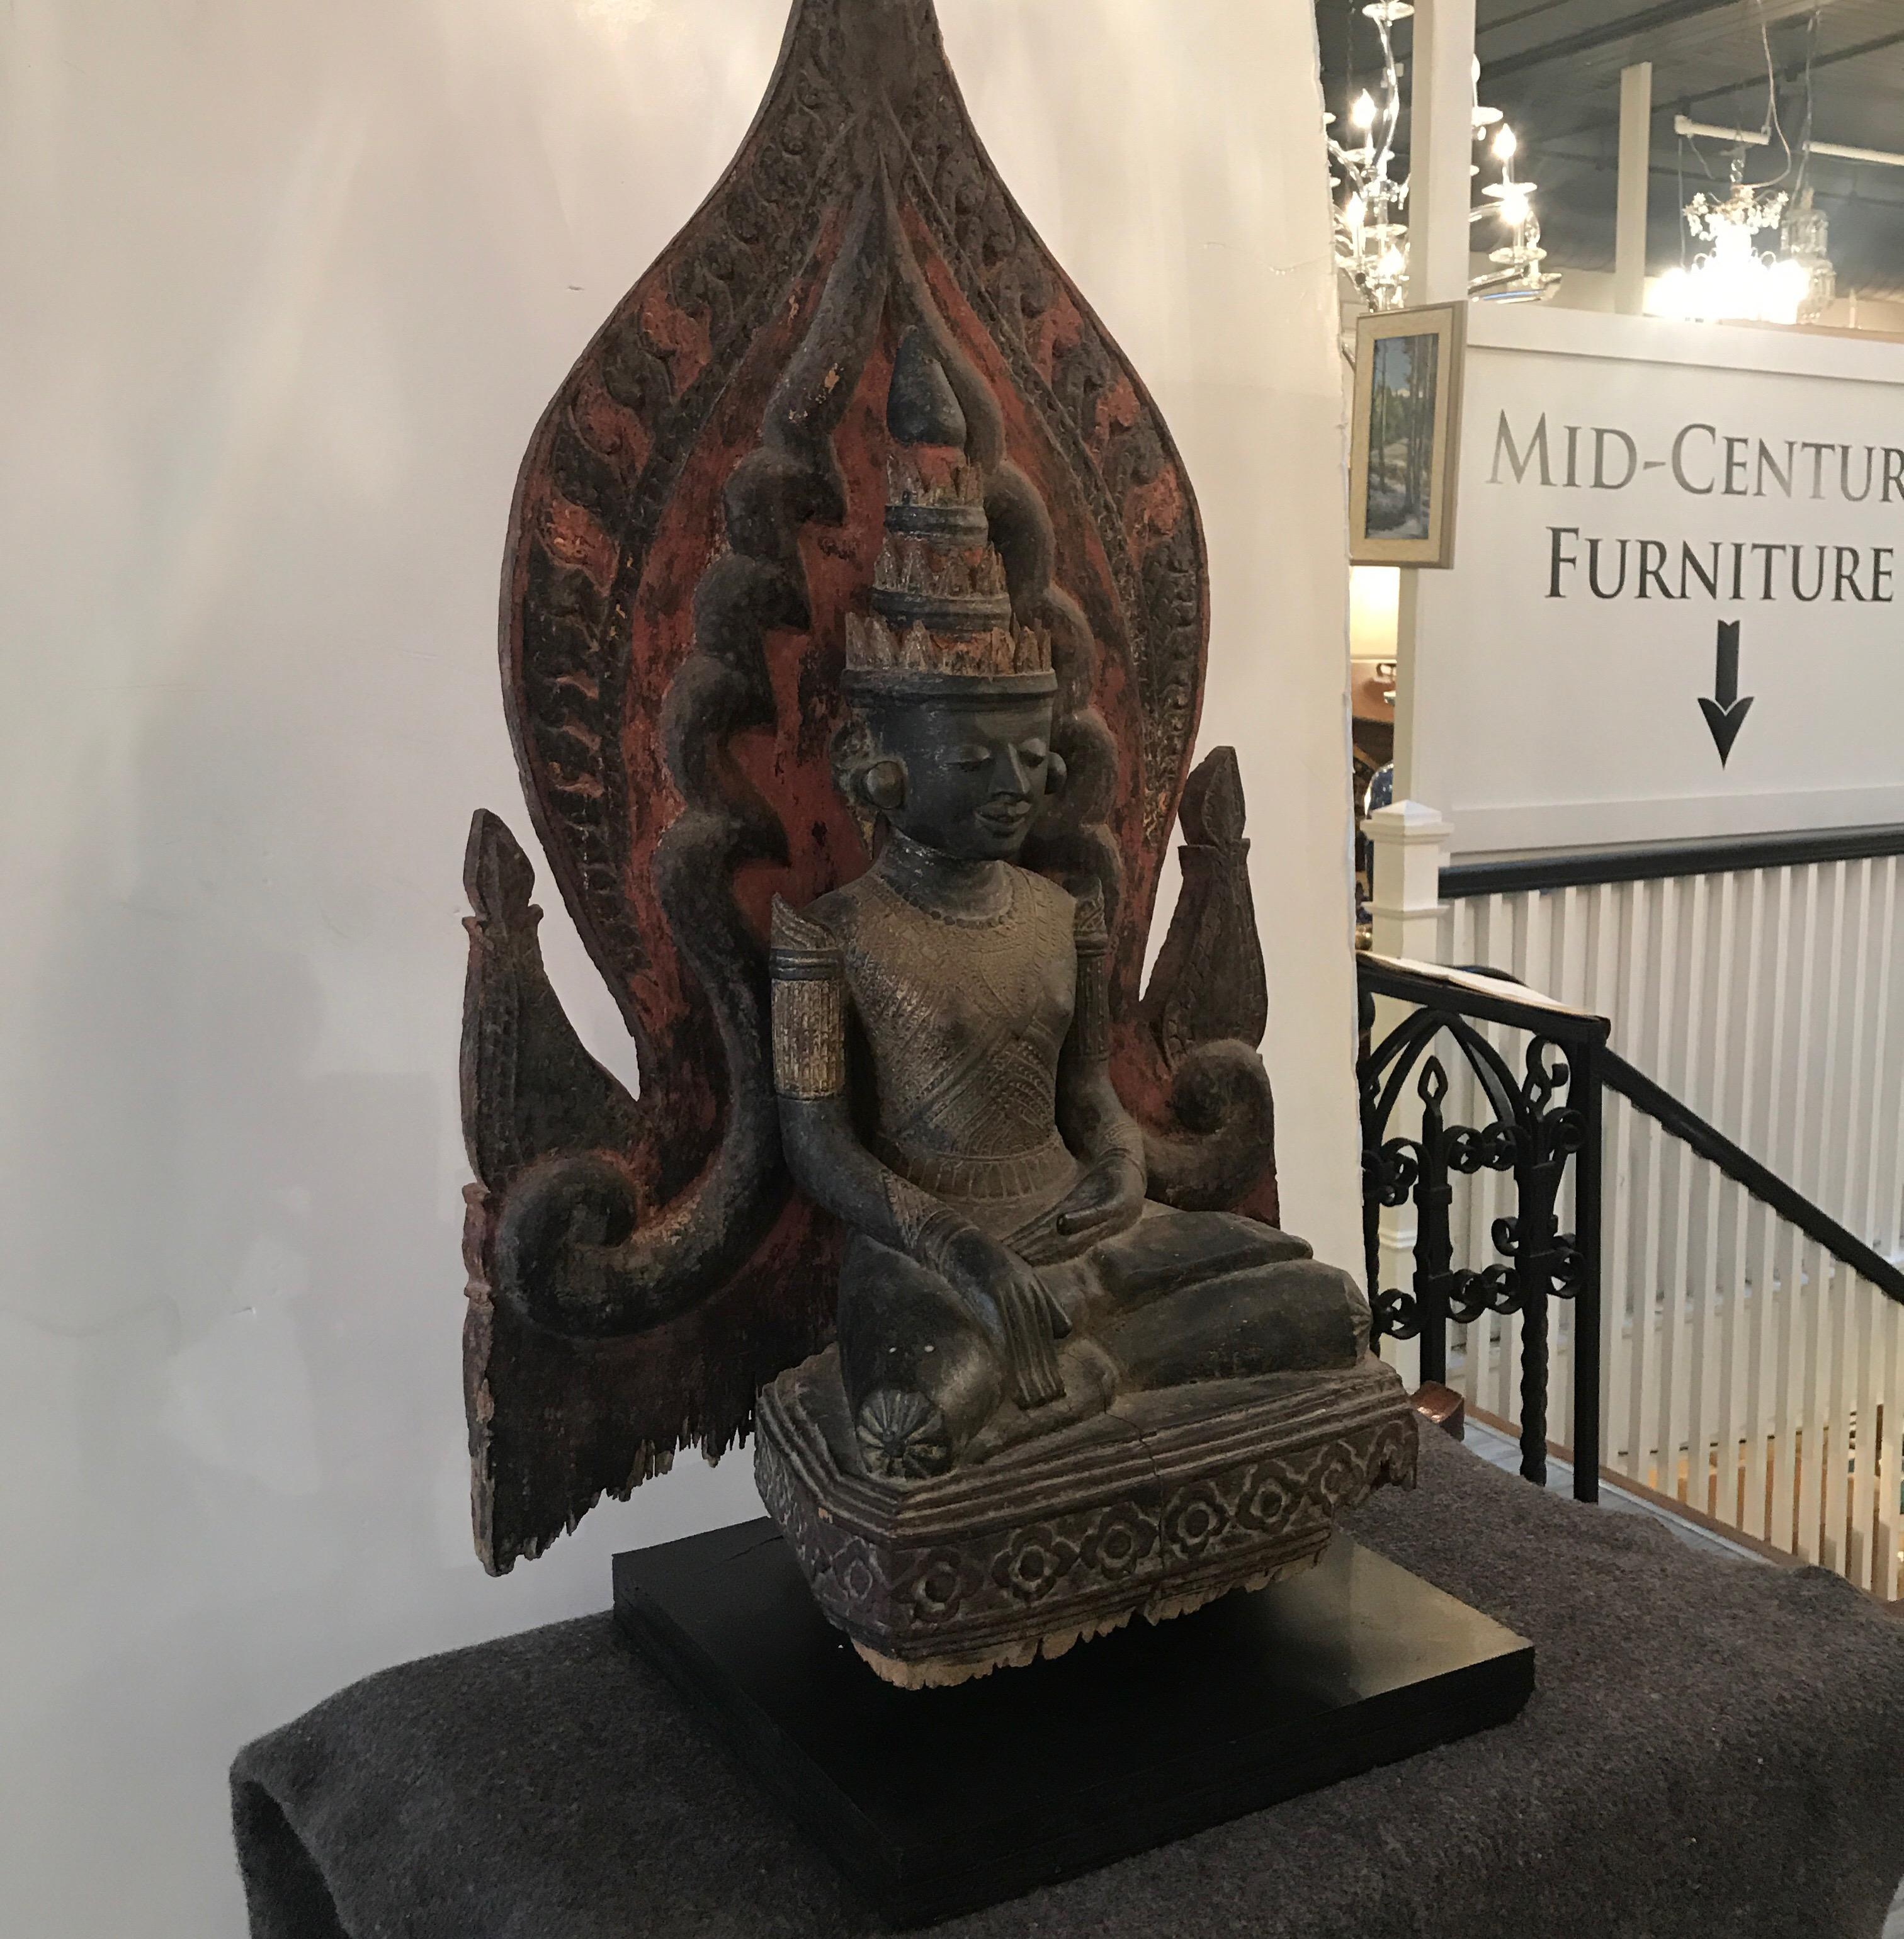 Rare large Thai Buddha sculpture from the mid-19th century. The central figure with shield back retaining some original color and paint. Some expected chipping and wear to original sculpture with a recent black painted wood base.